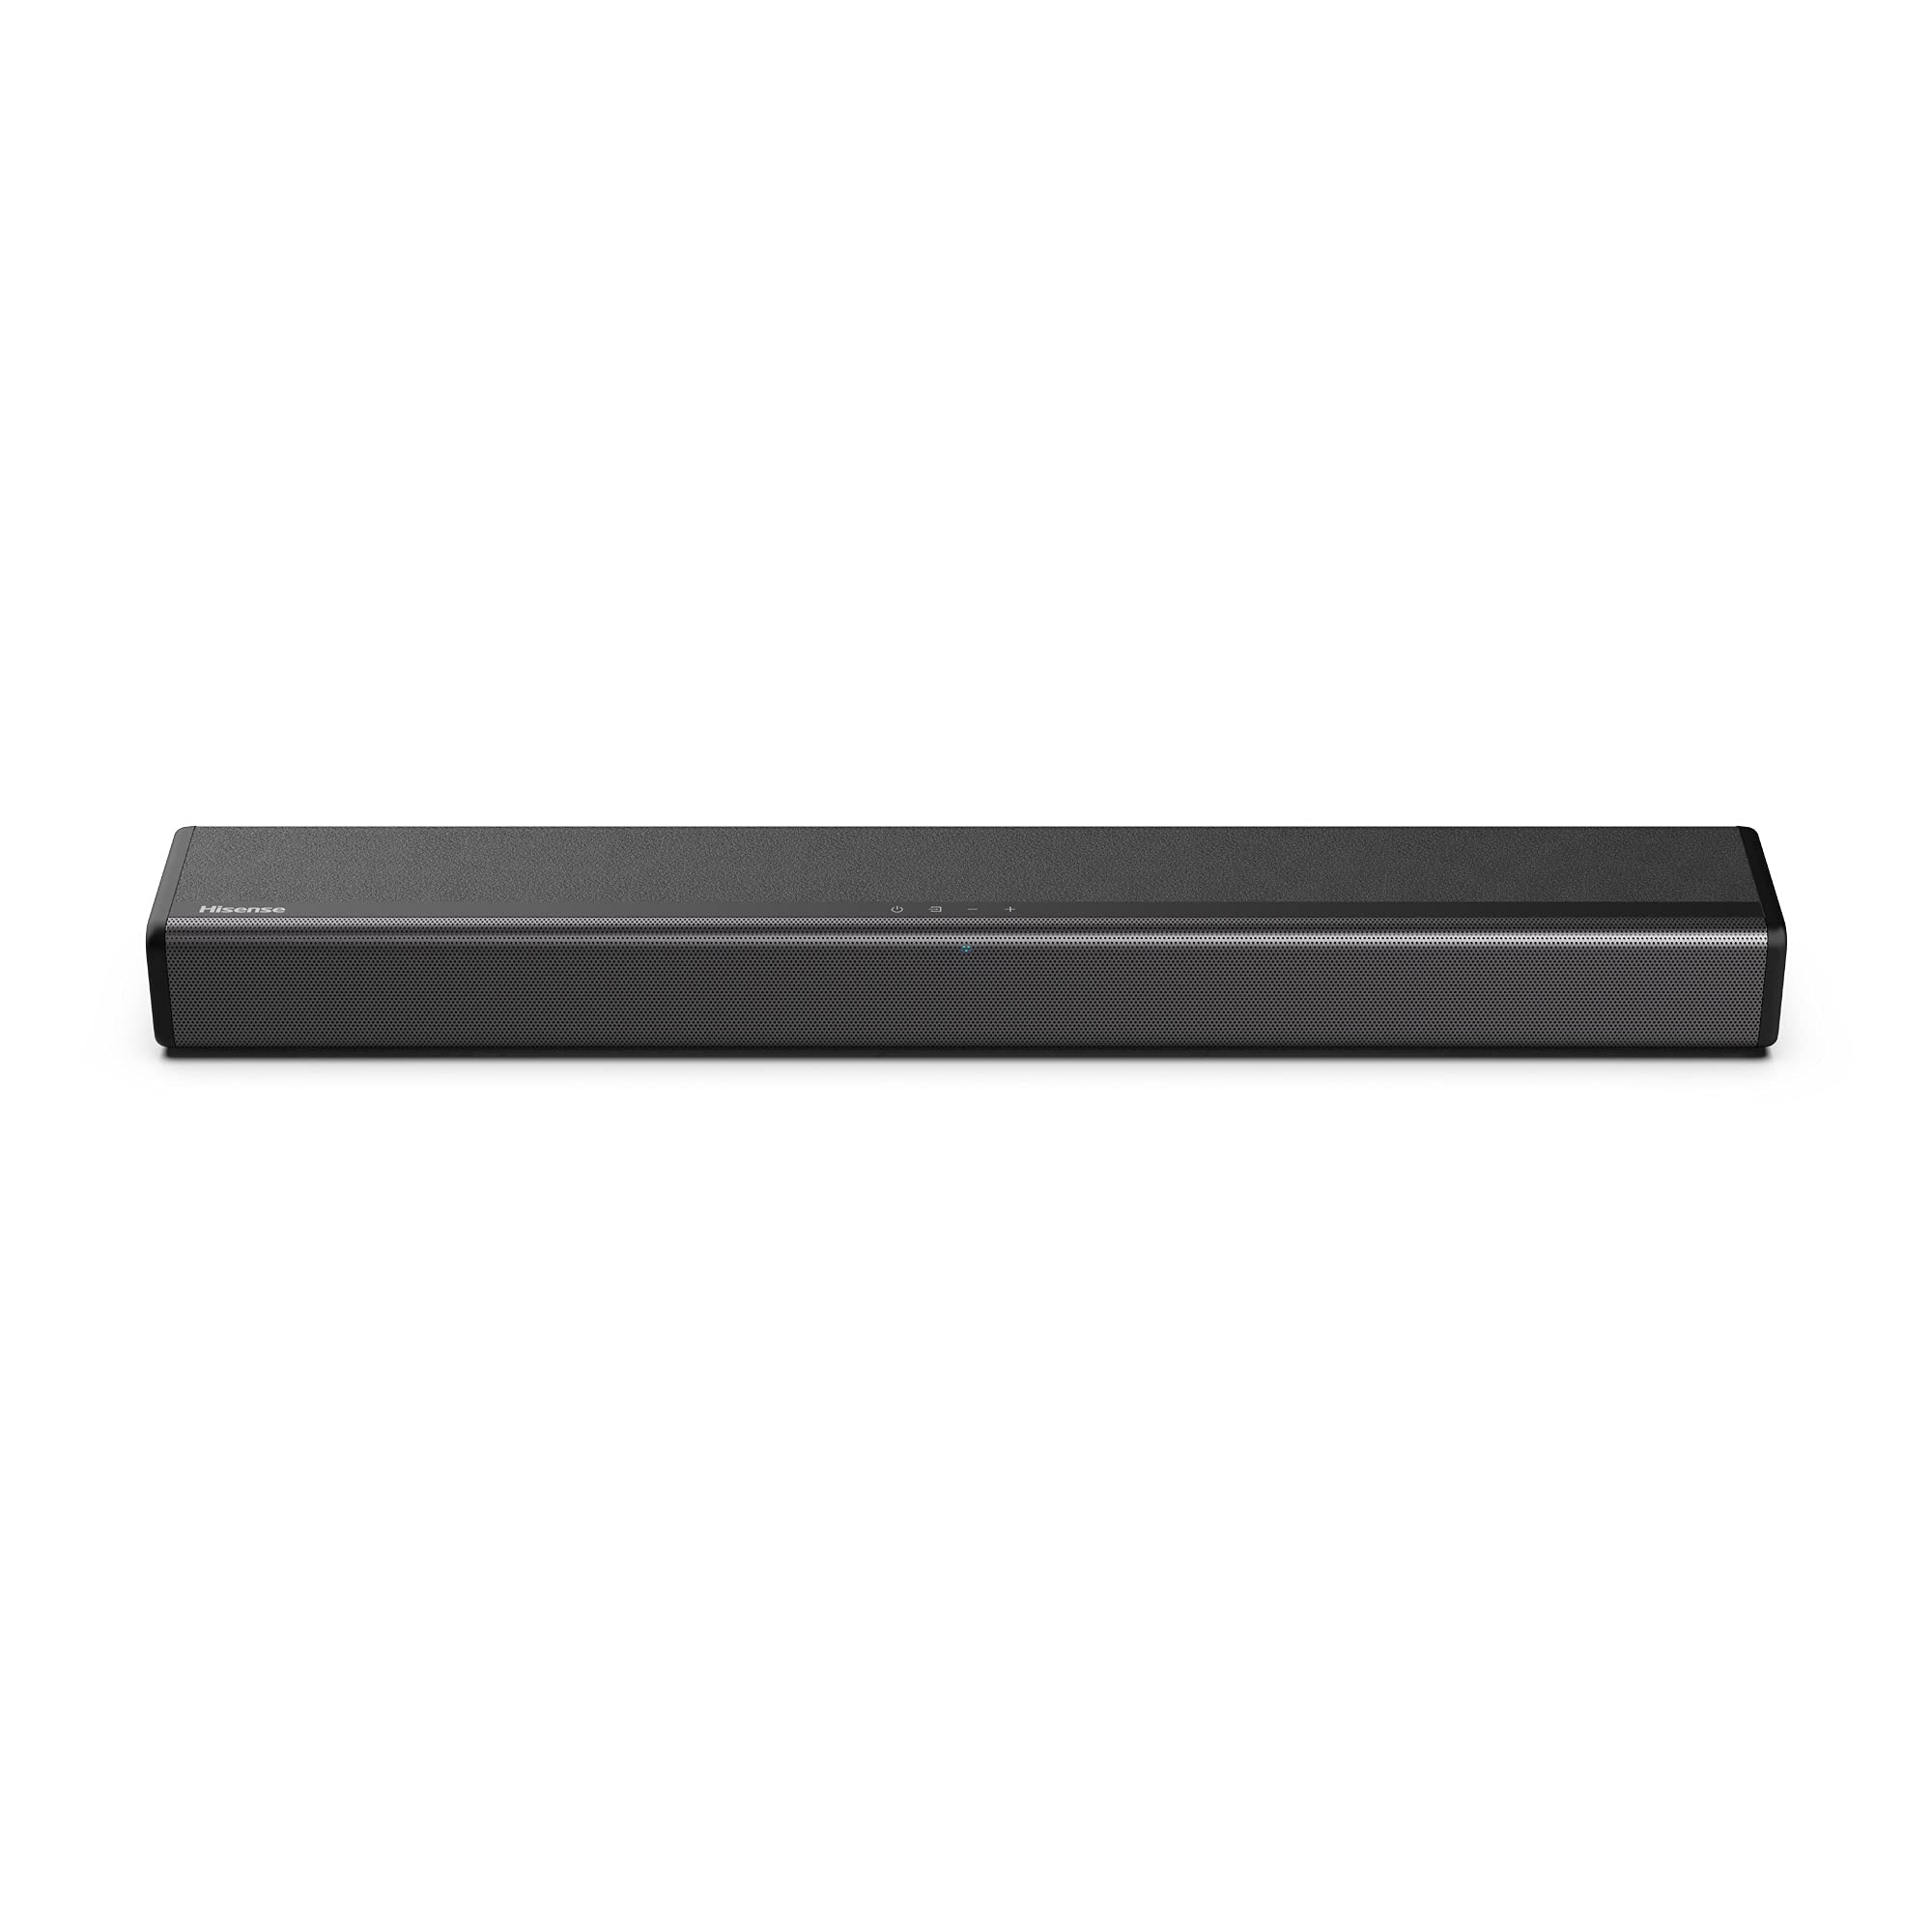 Hisense HS214 2.1ch Sound Bar with Built-in Subwoofer, 108W, All-in-one Compact Design with Wireless Bluetooth, Powered by Dolby Audio, Roku TV Ready, HDMI ARC/Optical/AUX/USB, 3 EQ Modes,Black